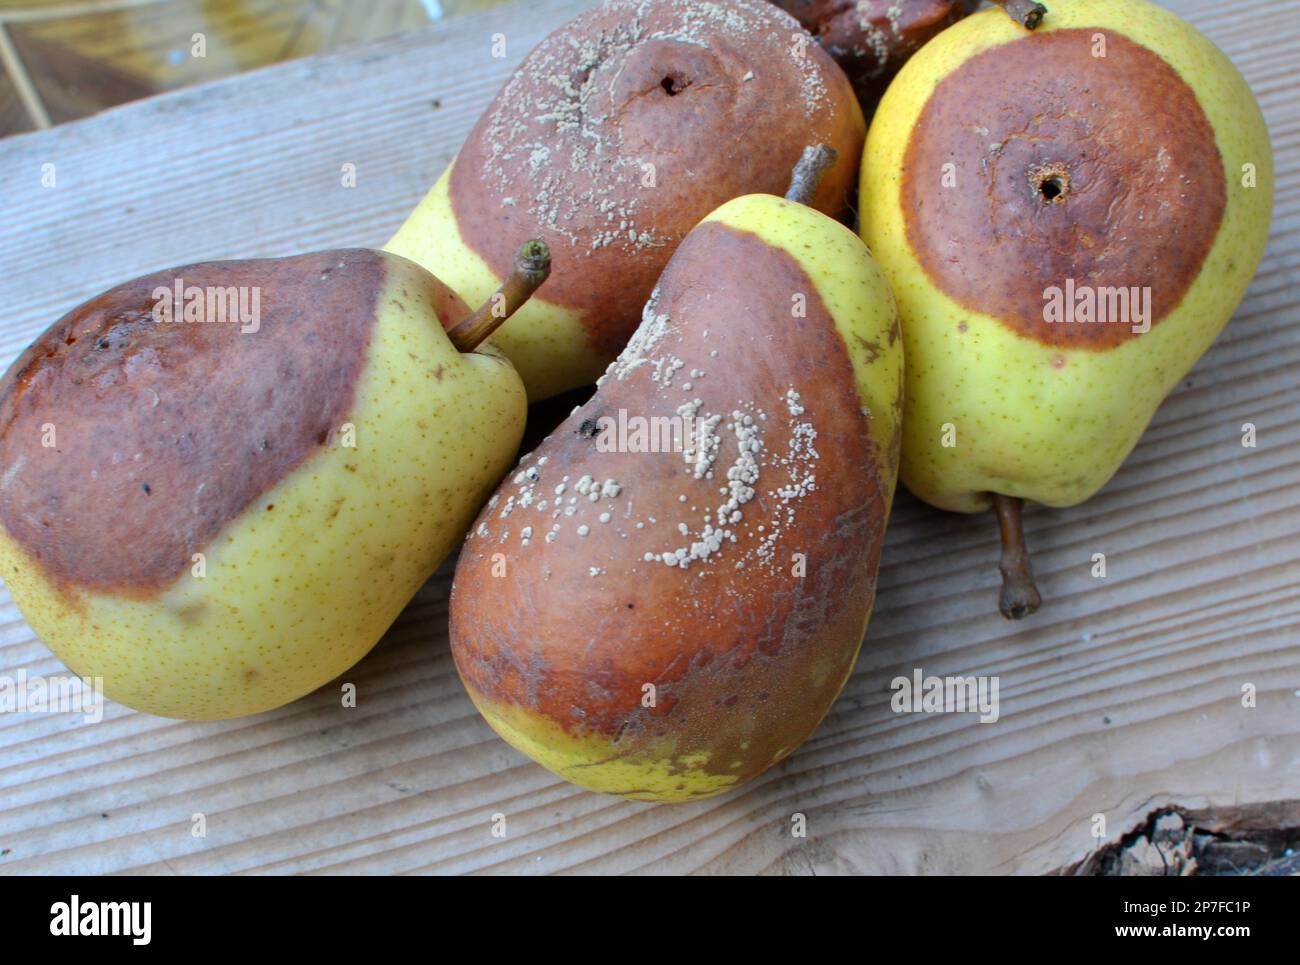 Pear fruits are infected with the fungus Monilinia fructigena Stock Photo